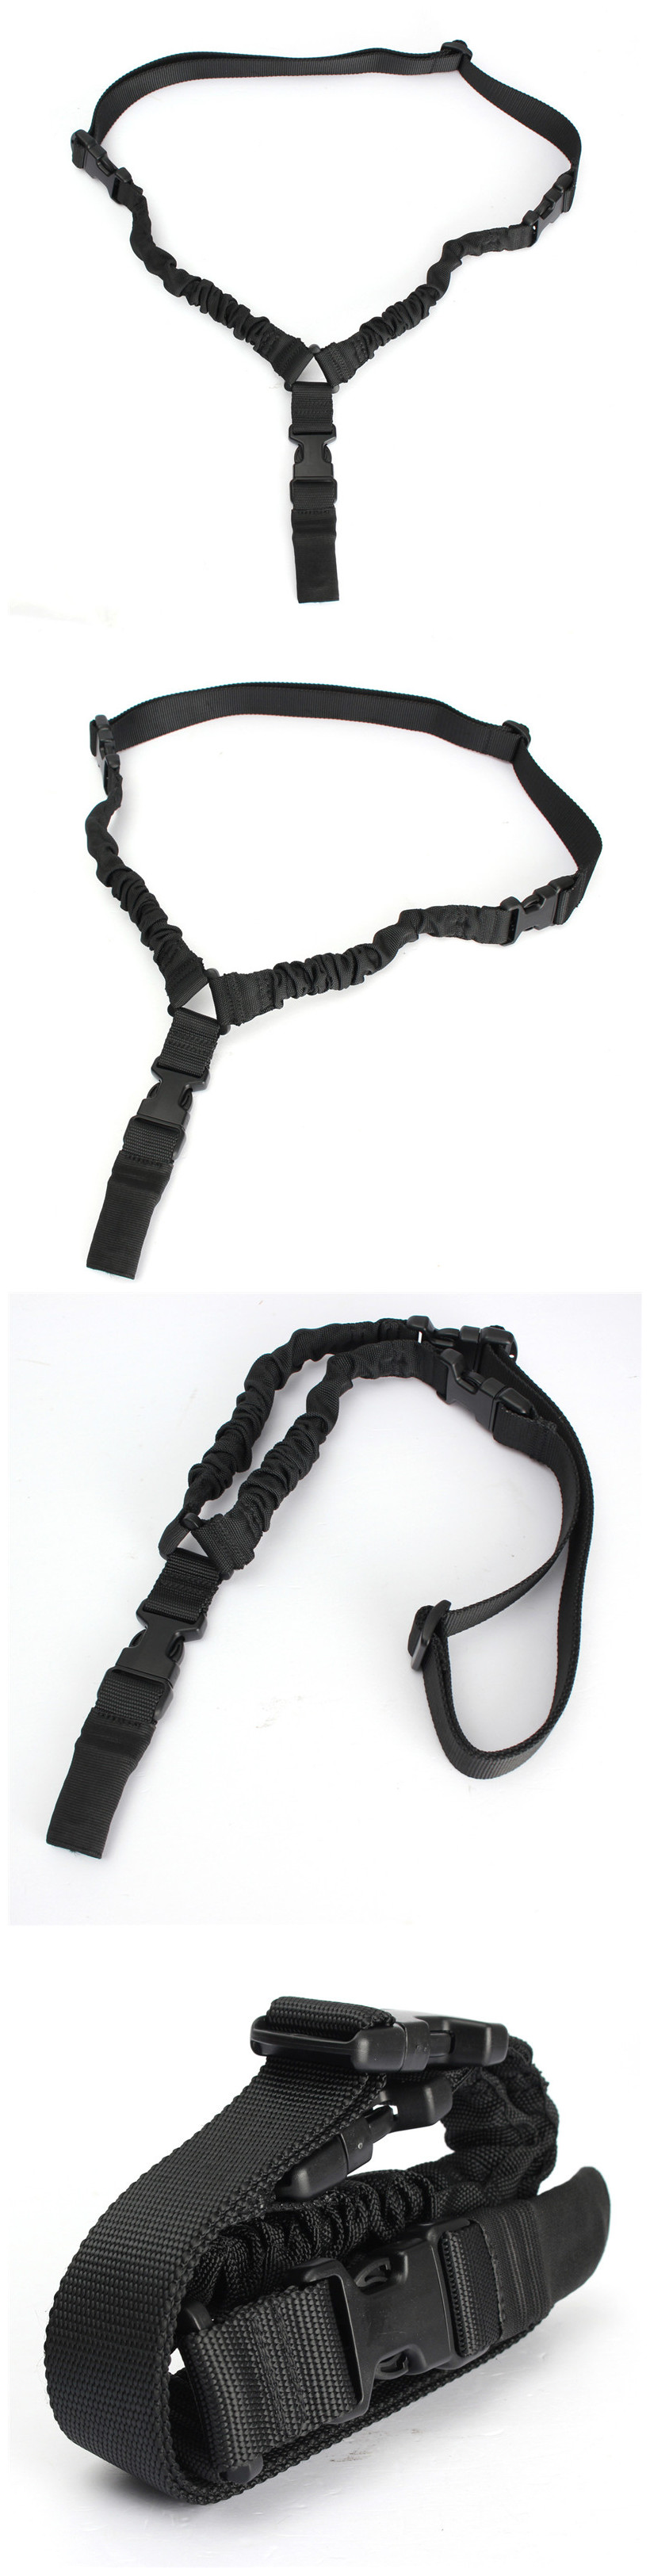 Outdoor-Sling-Two-Point-Elastic-Waist-Belt-Strap-Quick-Release-Emergency-Safety-Rescue-1050100-2